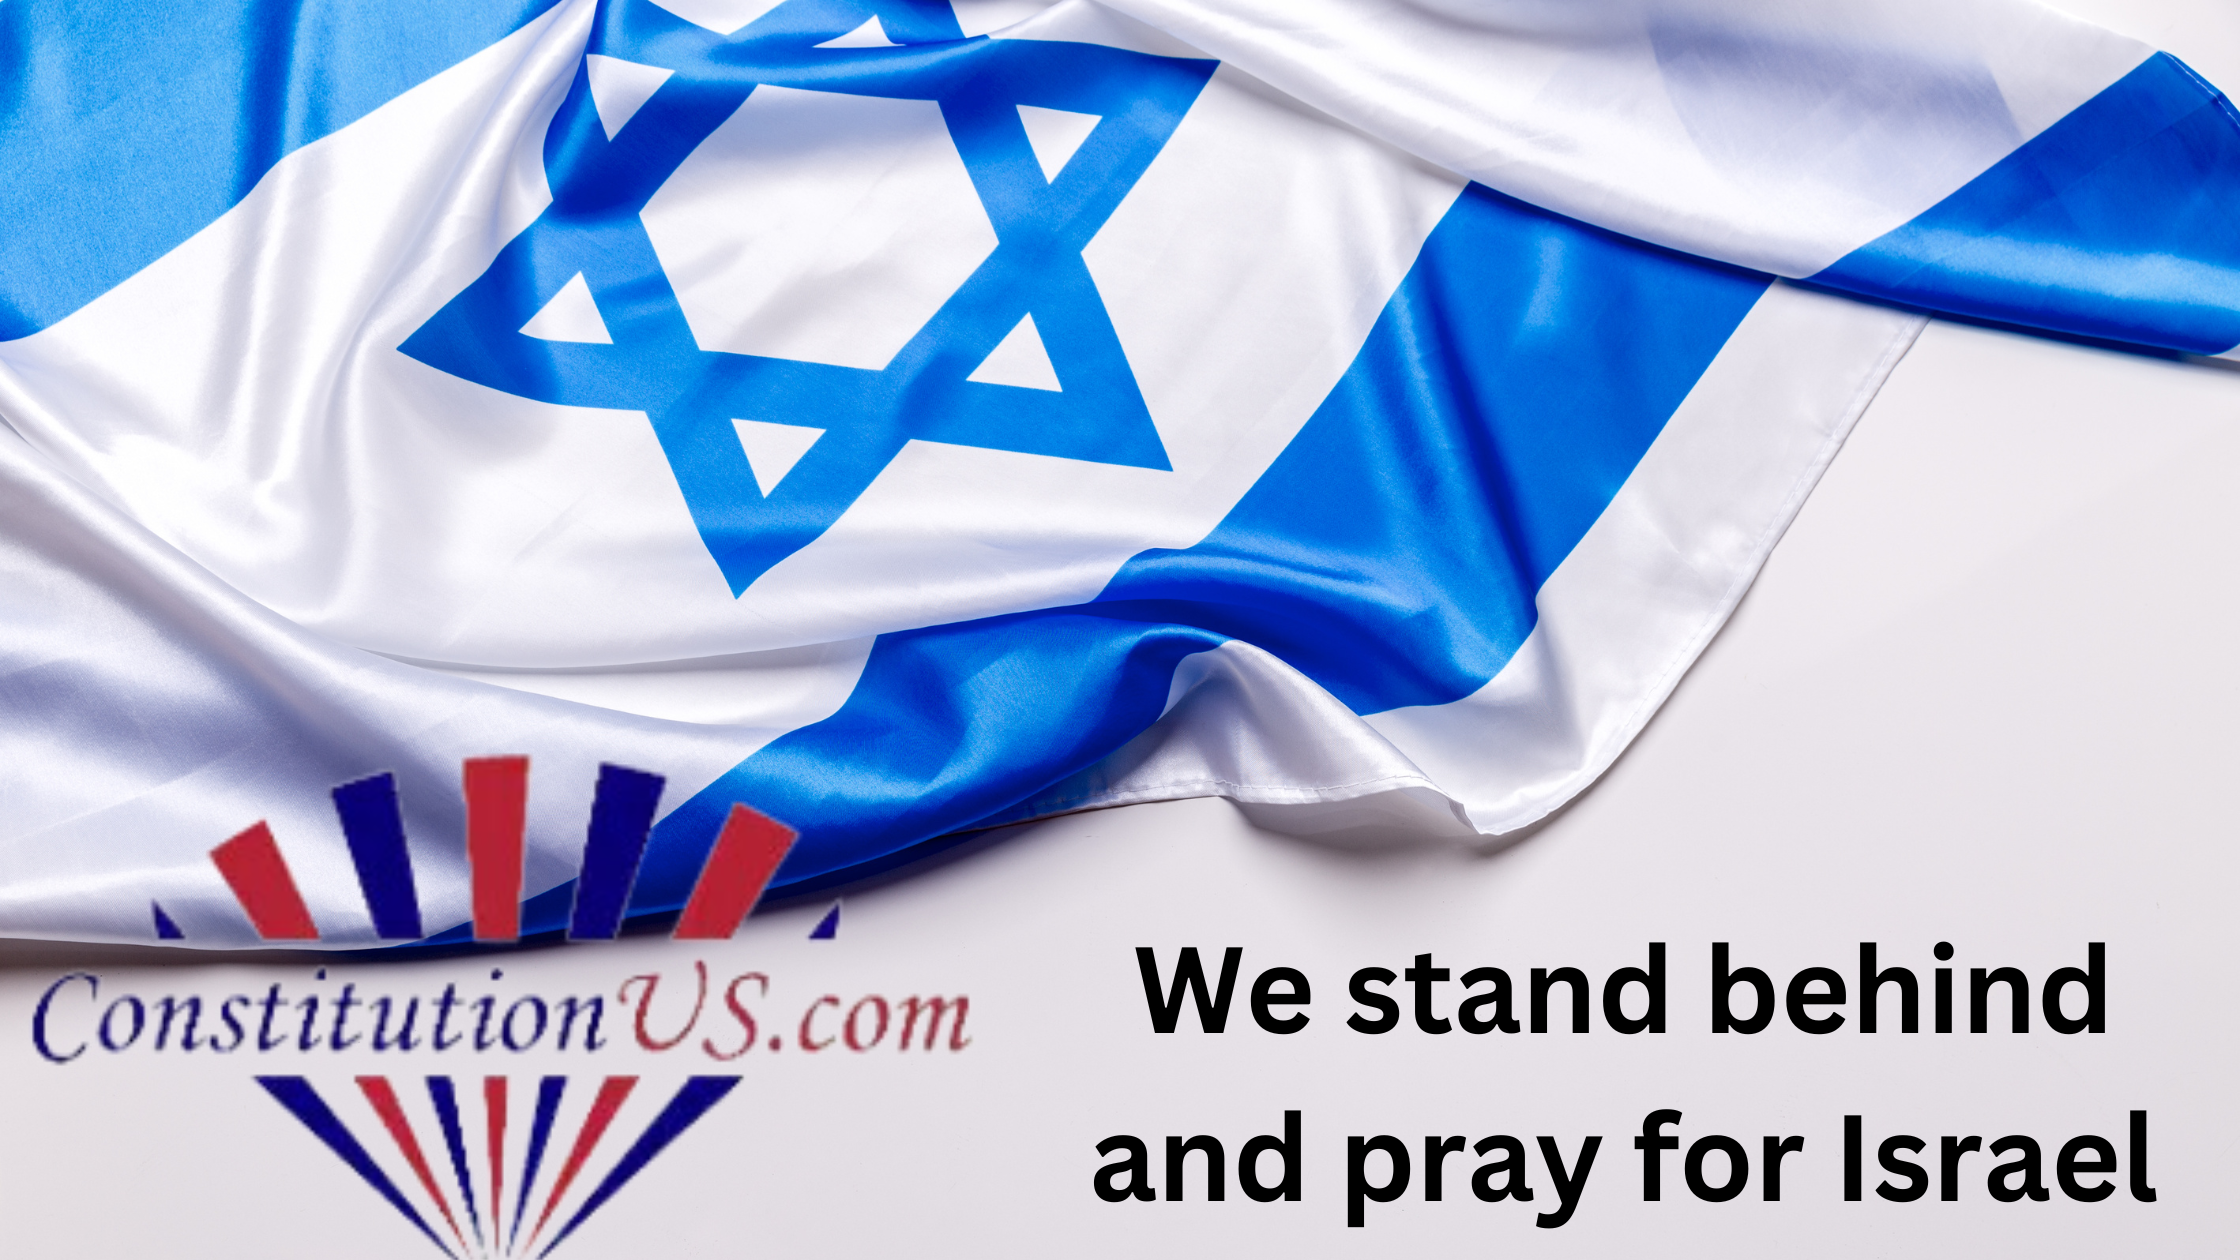 We stand behind and pray for Israel.